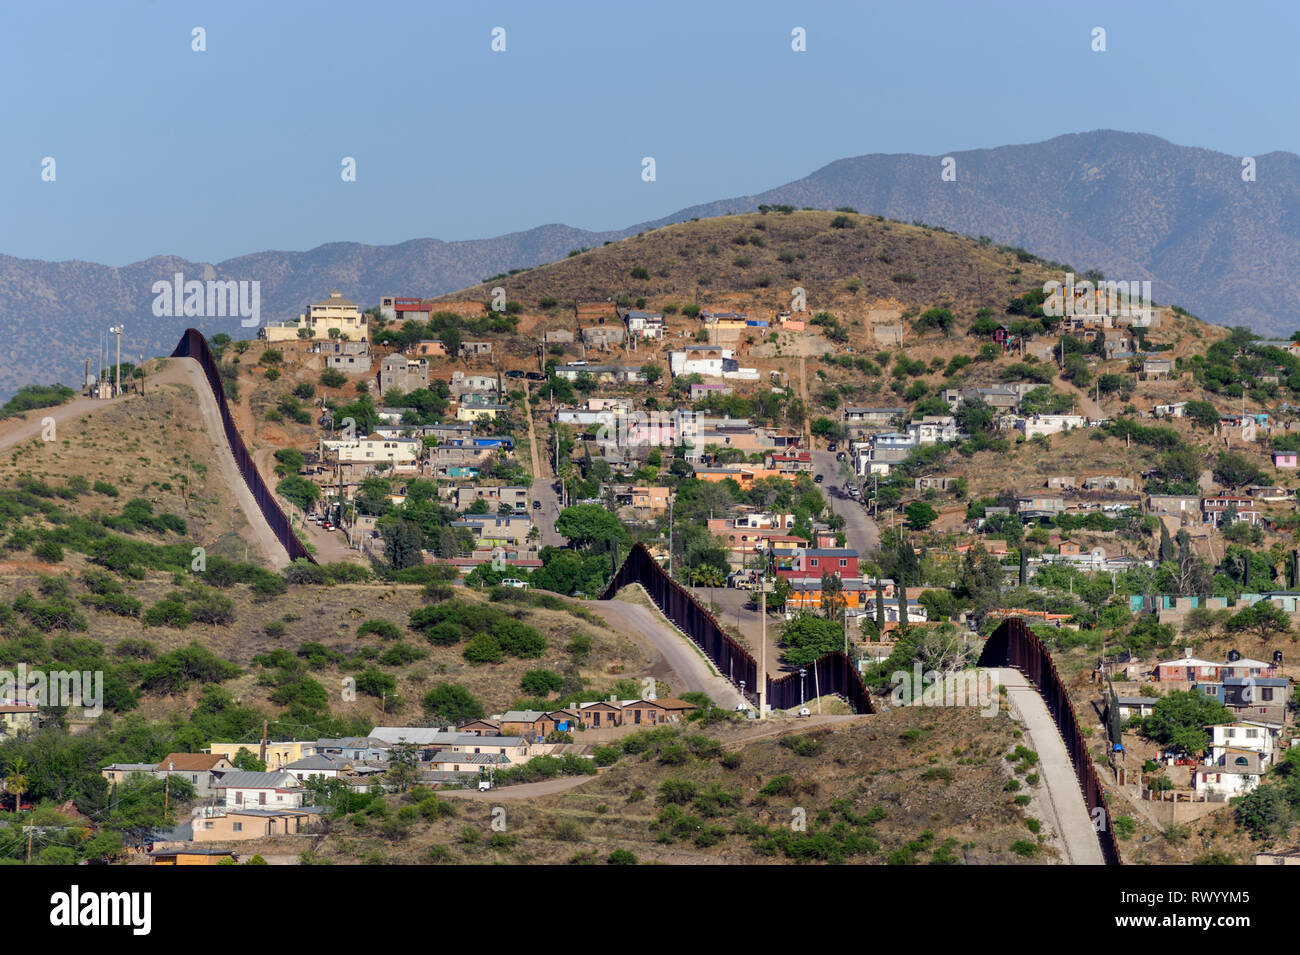 High view over Nogales Sonora Mexico from Nogales Arizona, looking southeast, showing US border fence and hilly terrain, April 2018 Stock Photo